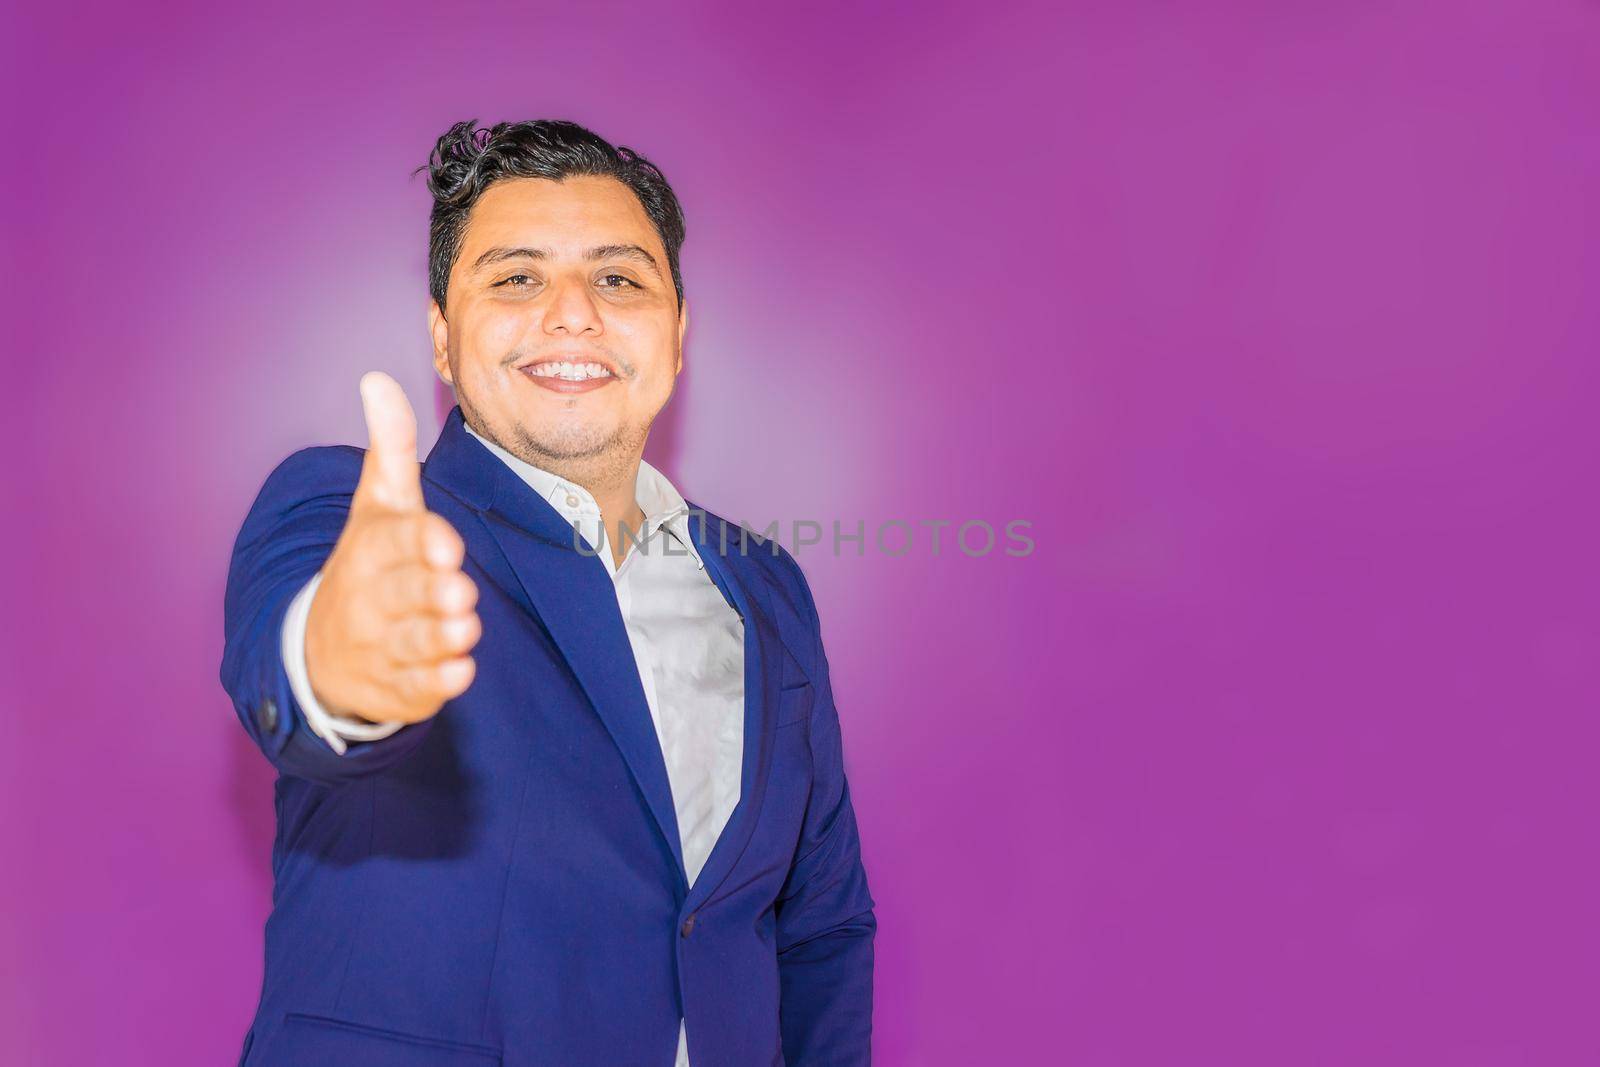 Nicaraguan man with blue suit on purple background with thumb up by cfalvarez